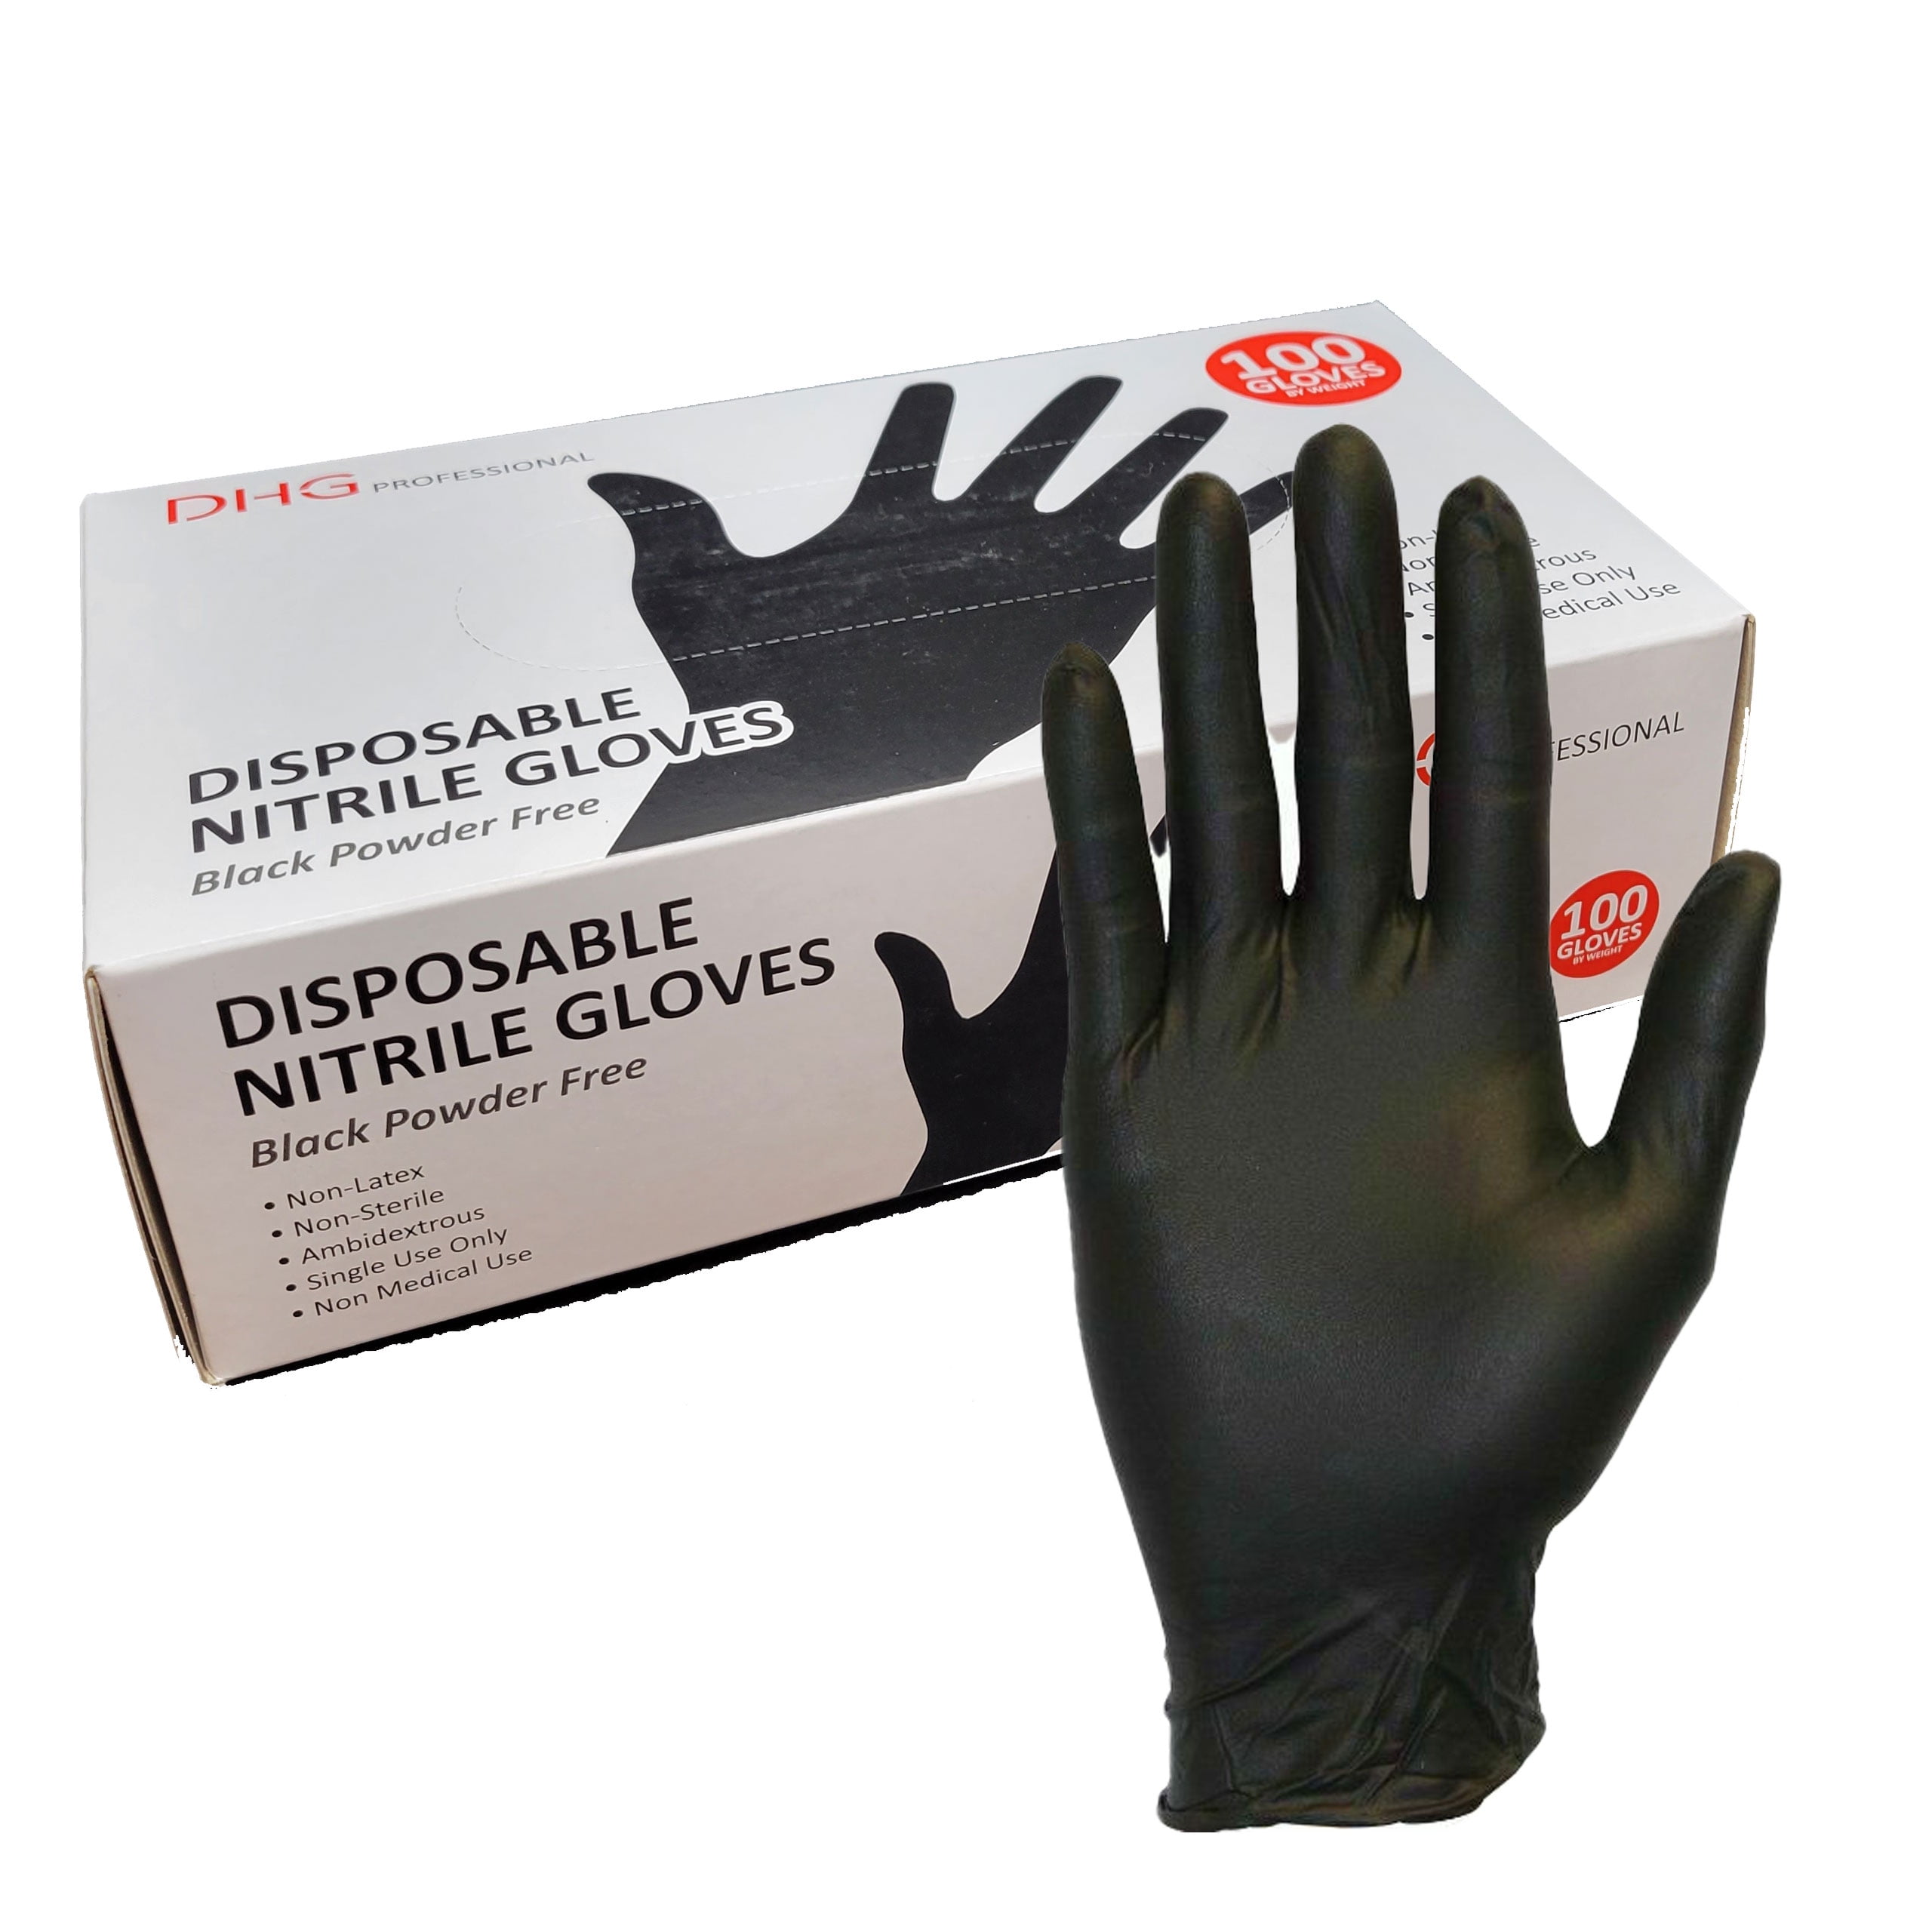 NITRILE POWDER FREE PPE EXAMINATION DISPOSABLE GLOVES UK APPROVED